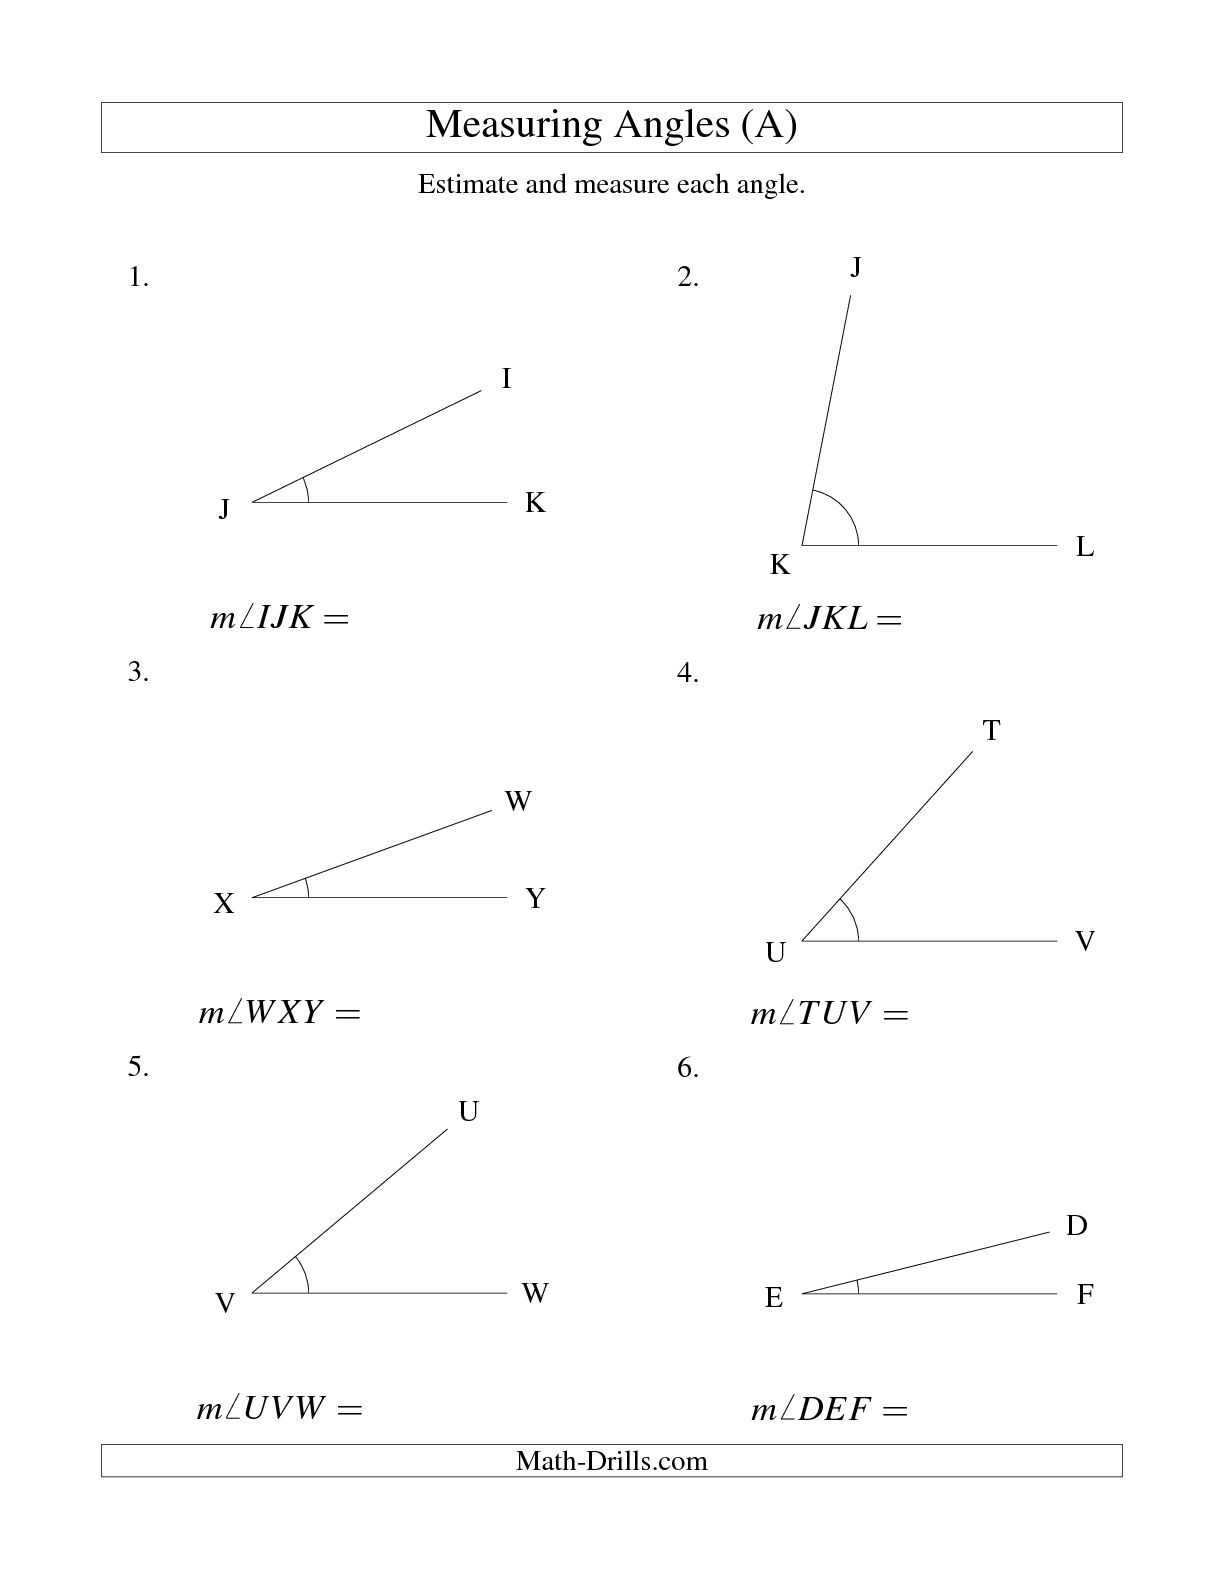 Triangle Angle Sum Worksheet Answer Key Along with the Volume and Surface area Triangular Prismsh Worksheet